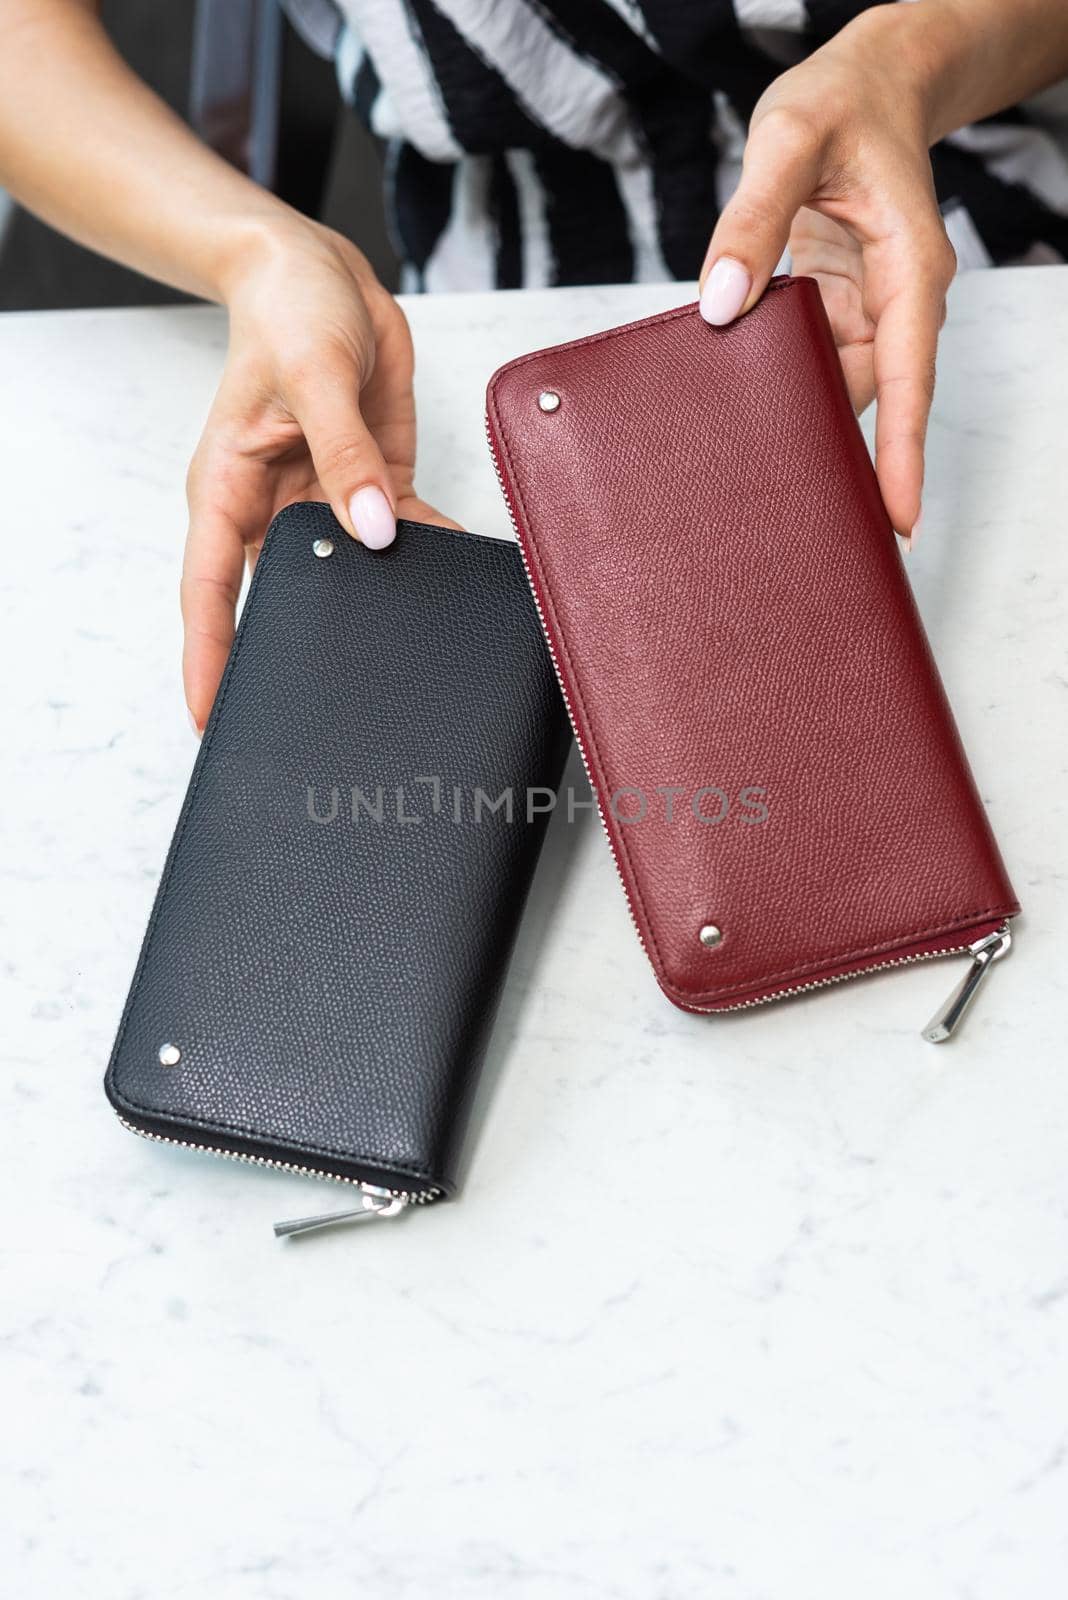 Two wallets in the hands of a girl